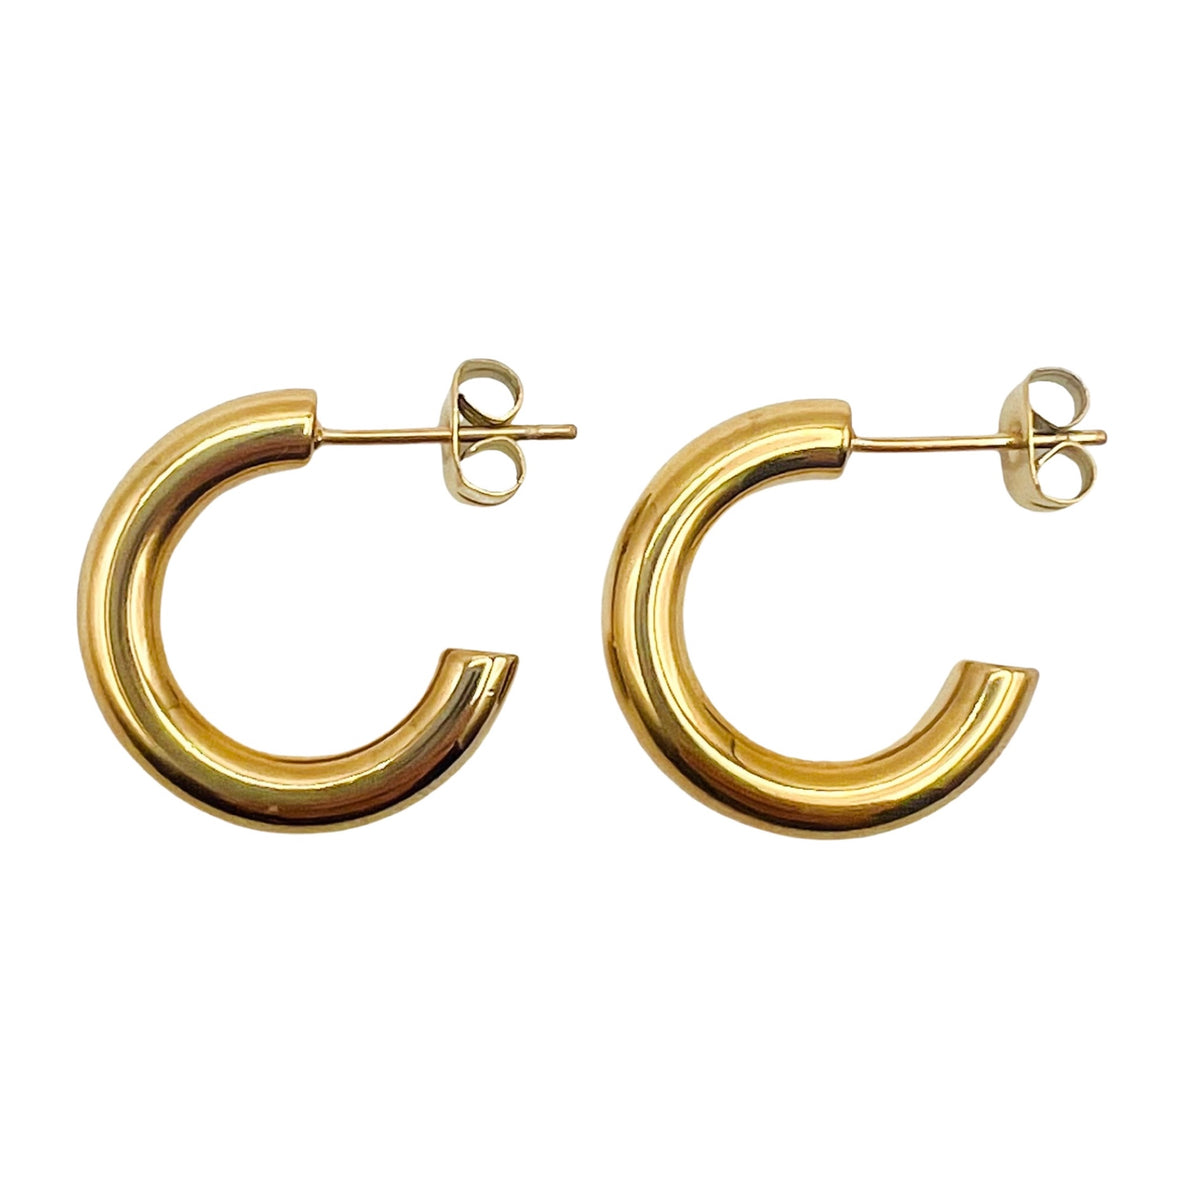 Amazon.com: Gacimy Small Gold Hoop Earrings for Women, 14K Gold Plated Hoops  with 925 Sterling Silver Post, Yellow Gold 14 16 20mm Small Hoop Earrings  for Women: Clothing, Shoes & Jewelry